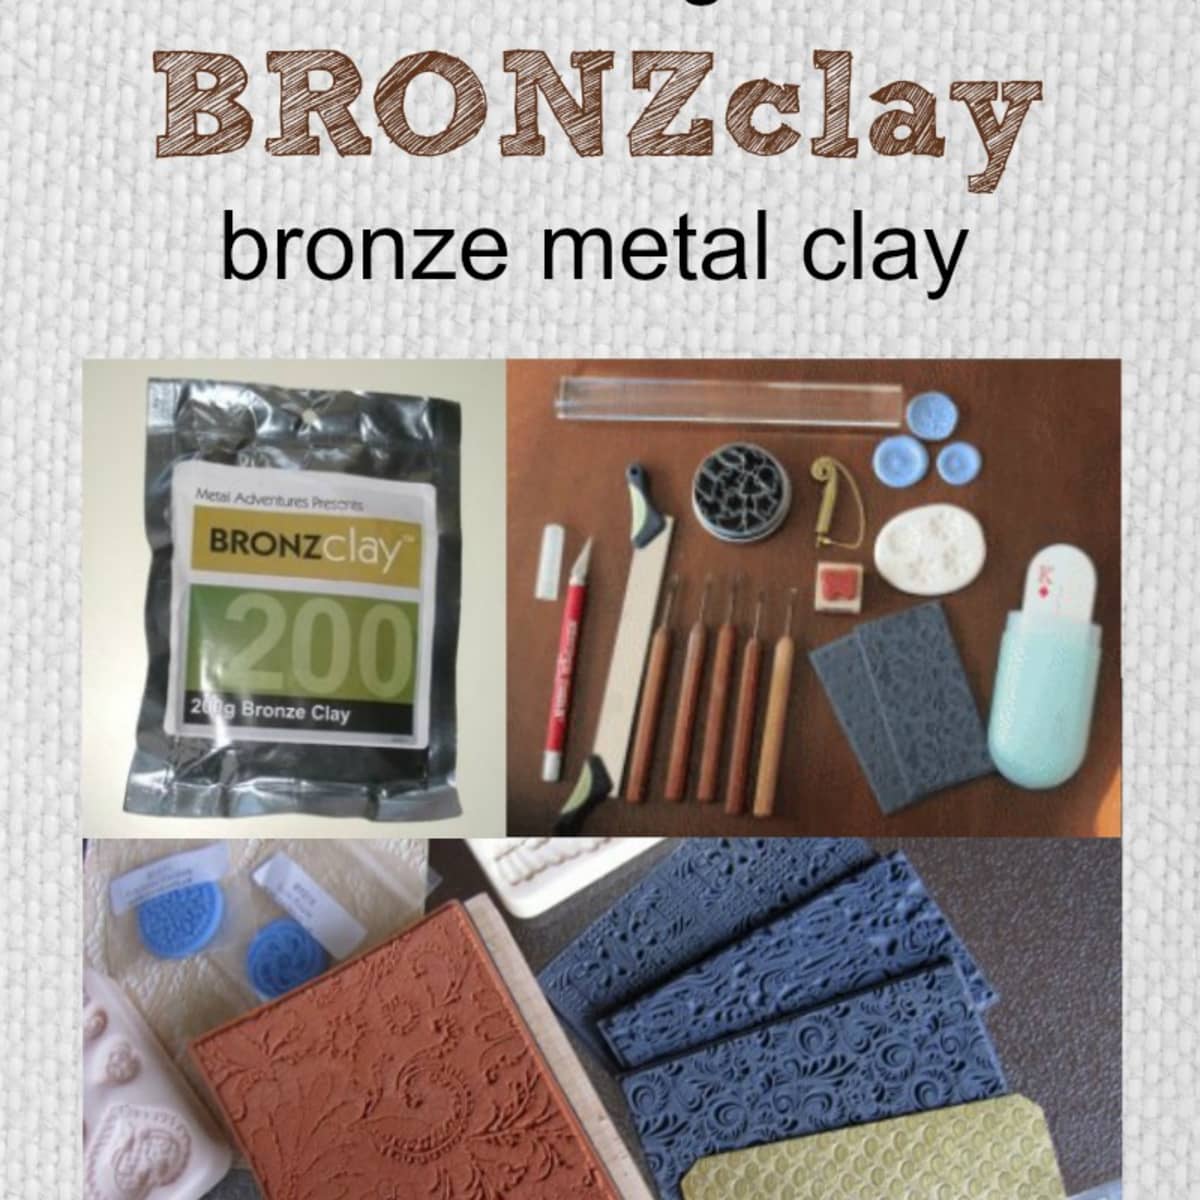 BRONZclay Tools and Supplies for Making Bronze Jewelry - FeltMagnet